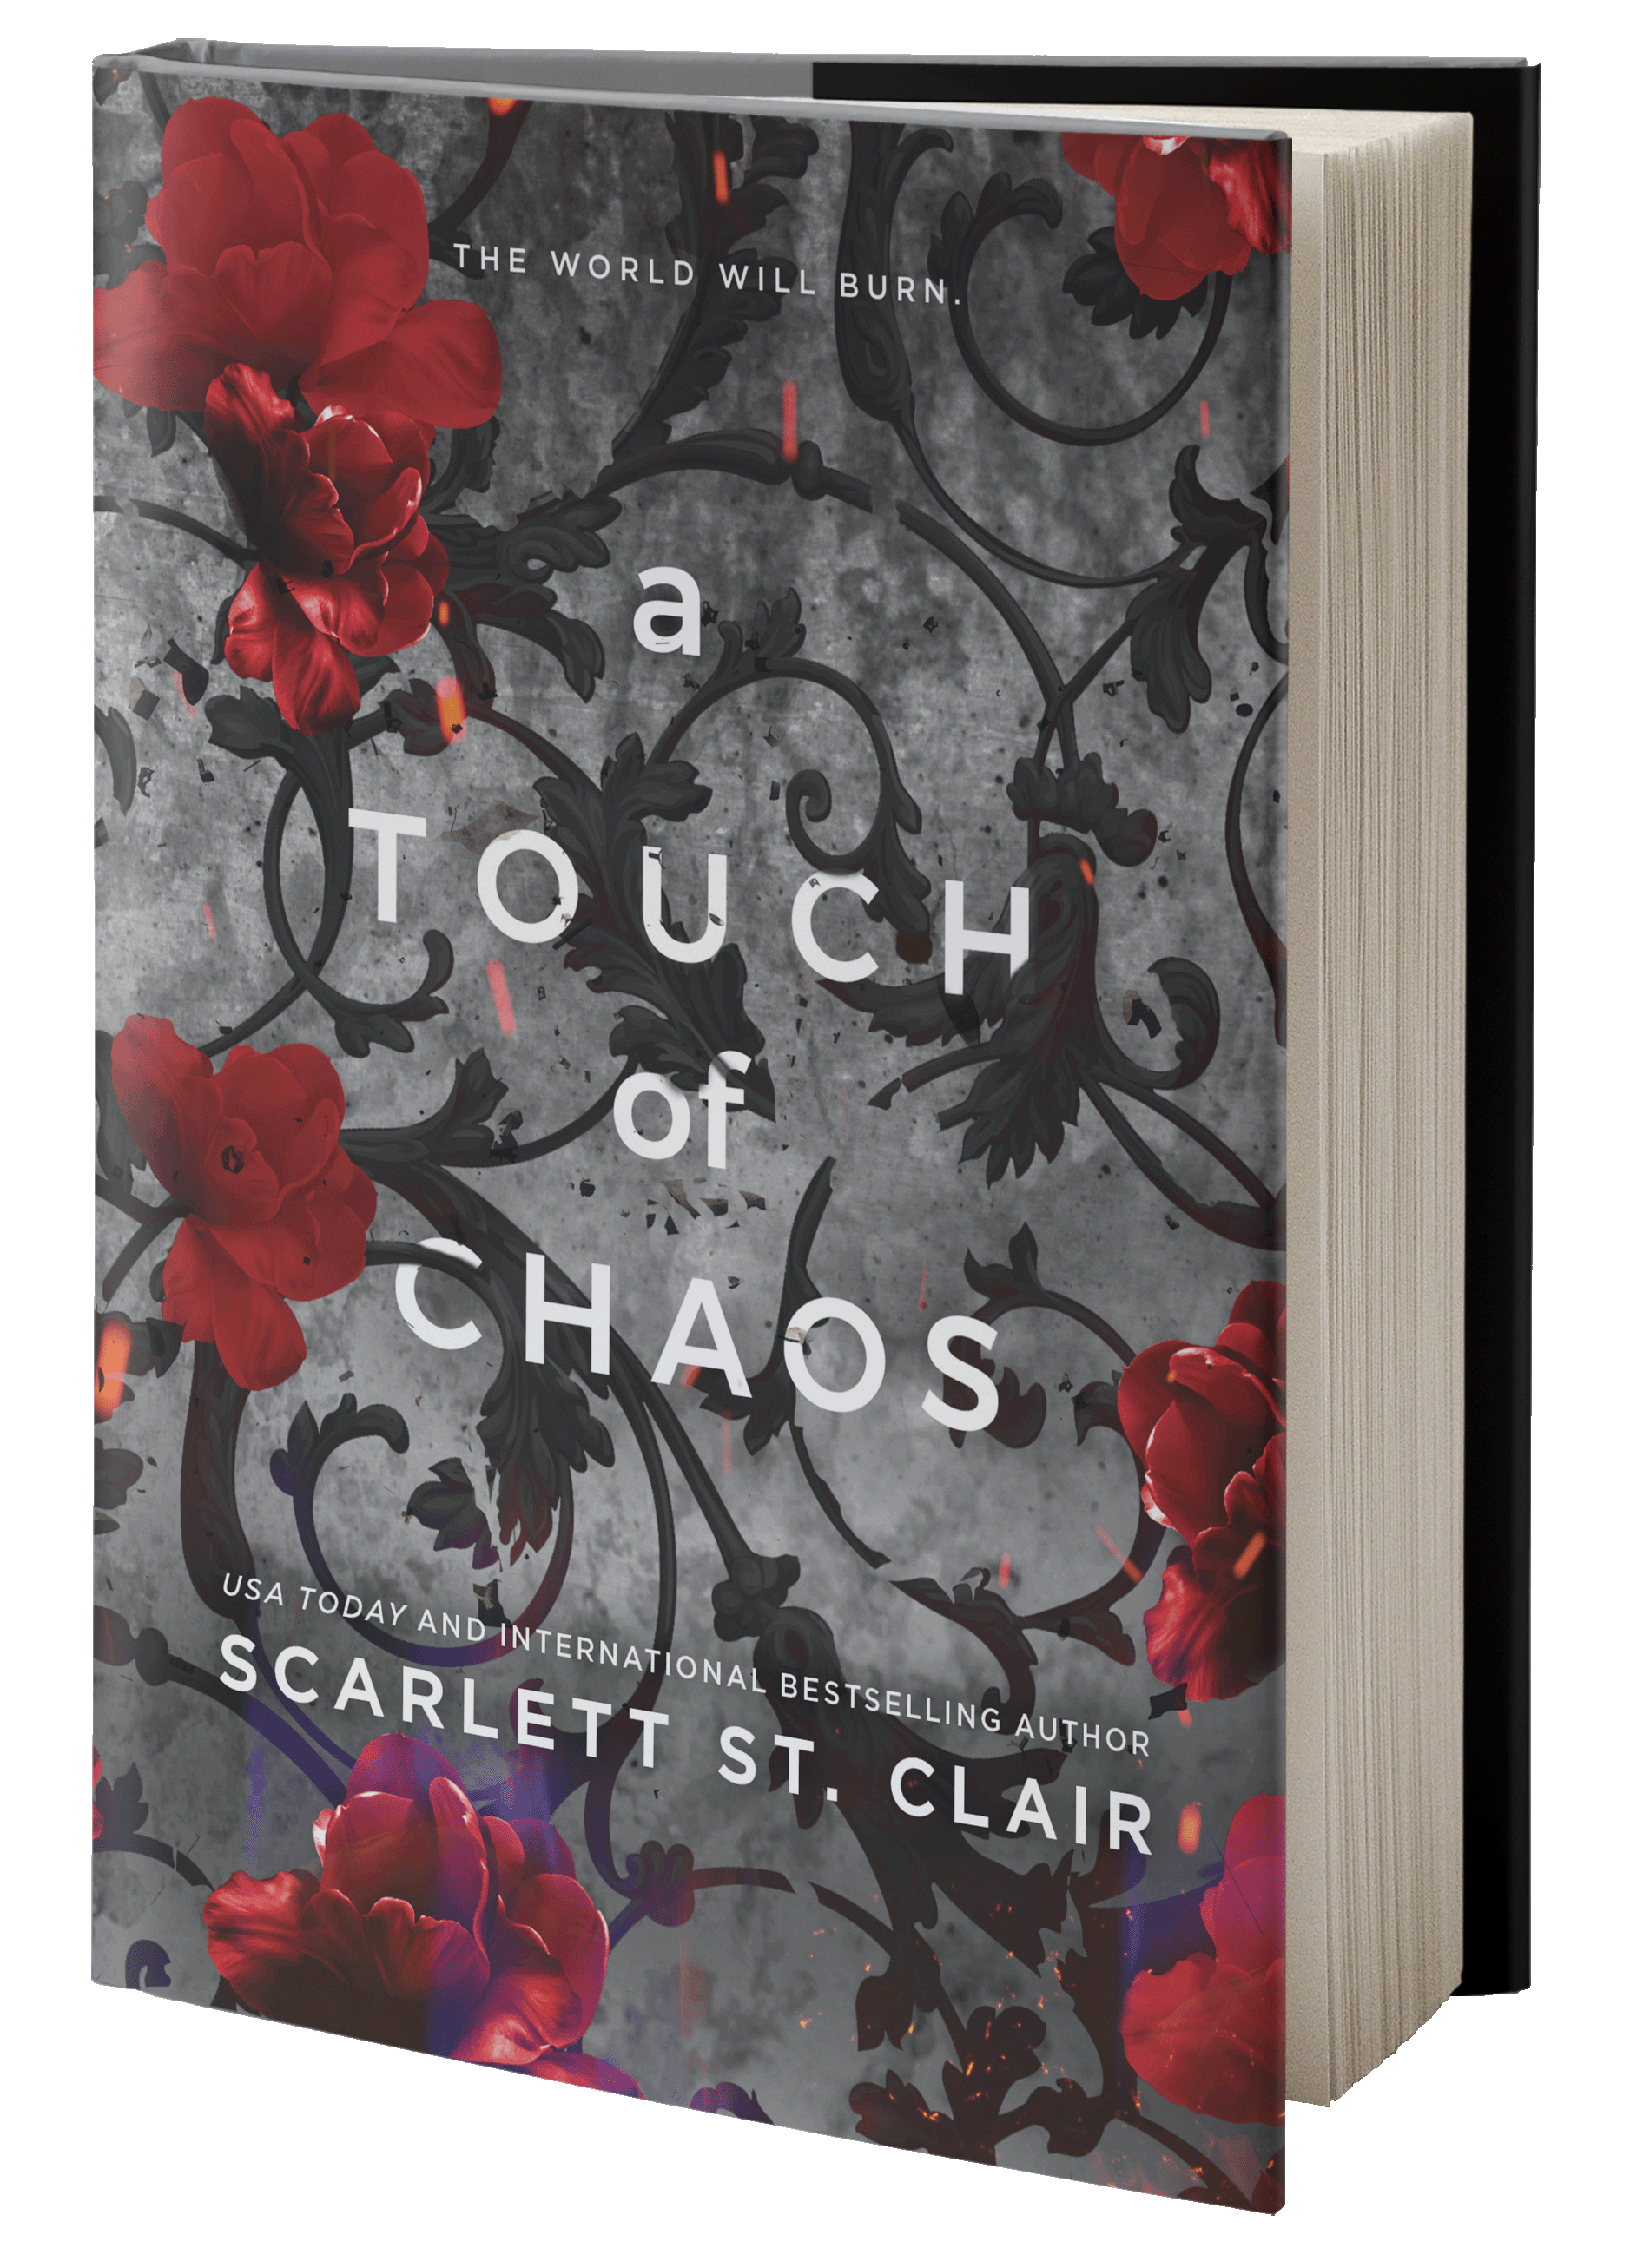 Book cover of "A Touch of Chaos"